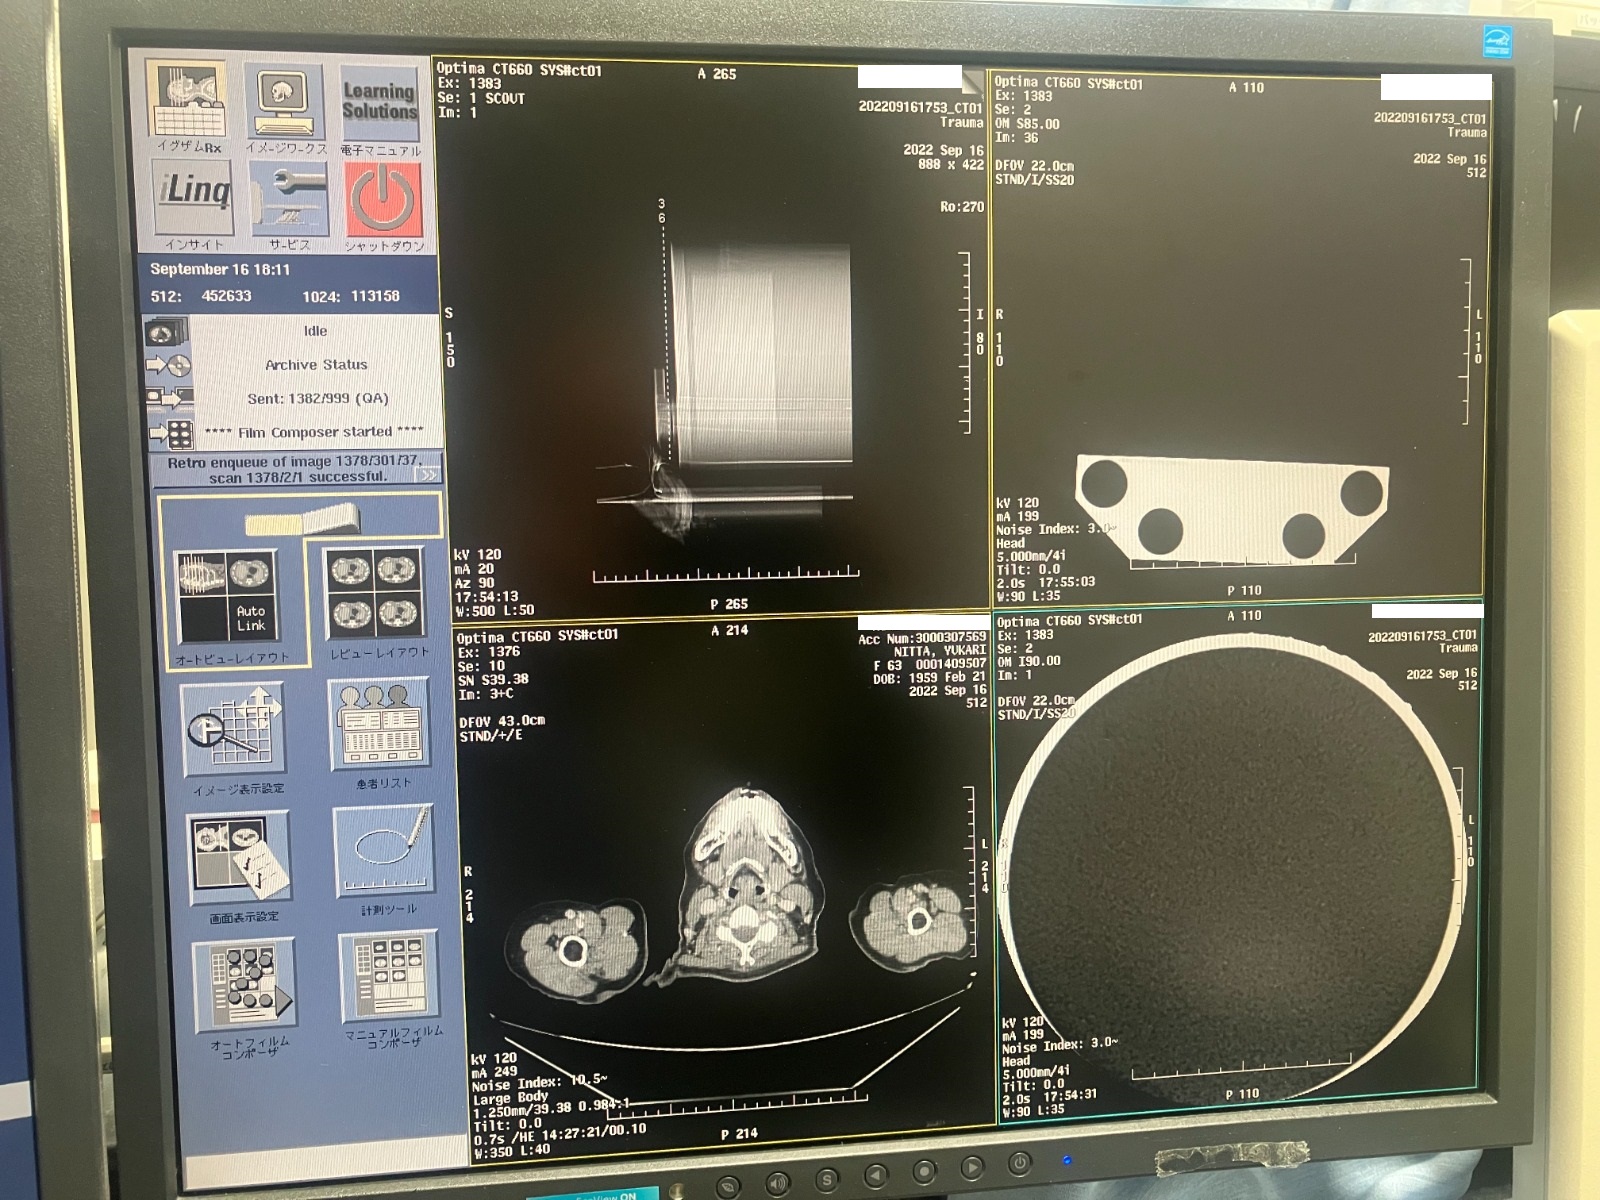 Used GE Optima CT660 CT Scan for sale (ID 2019) | 20Med